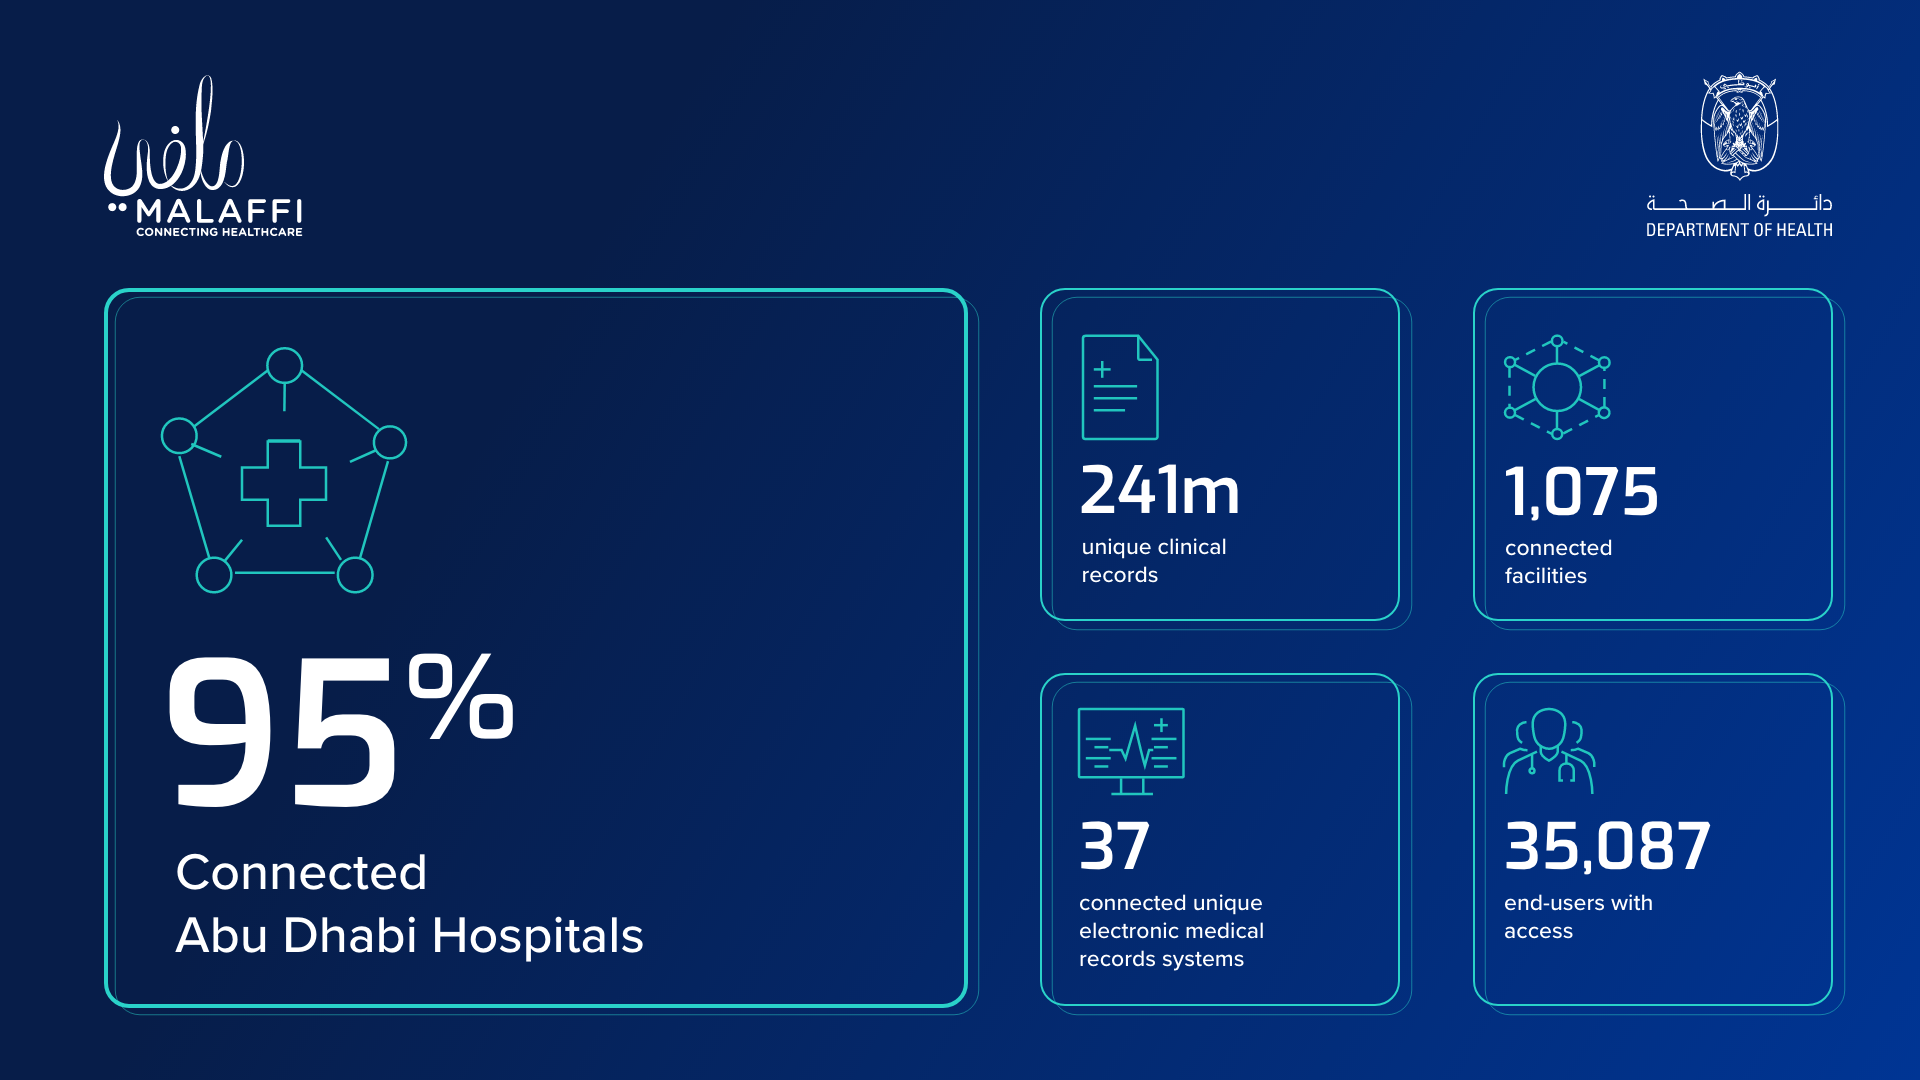 DoH announces 95% of Abu Dhabi based hospitals now connected to Malaffi